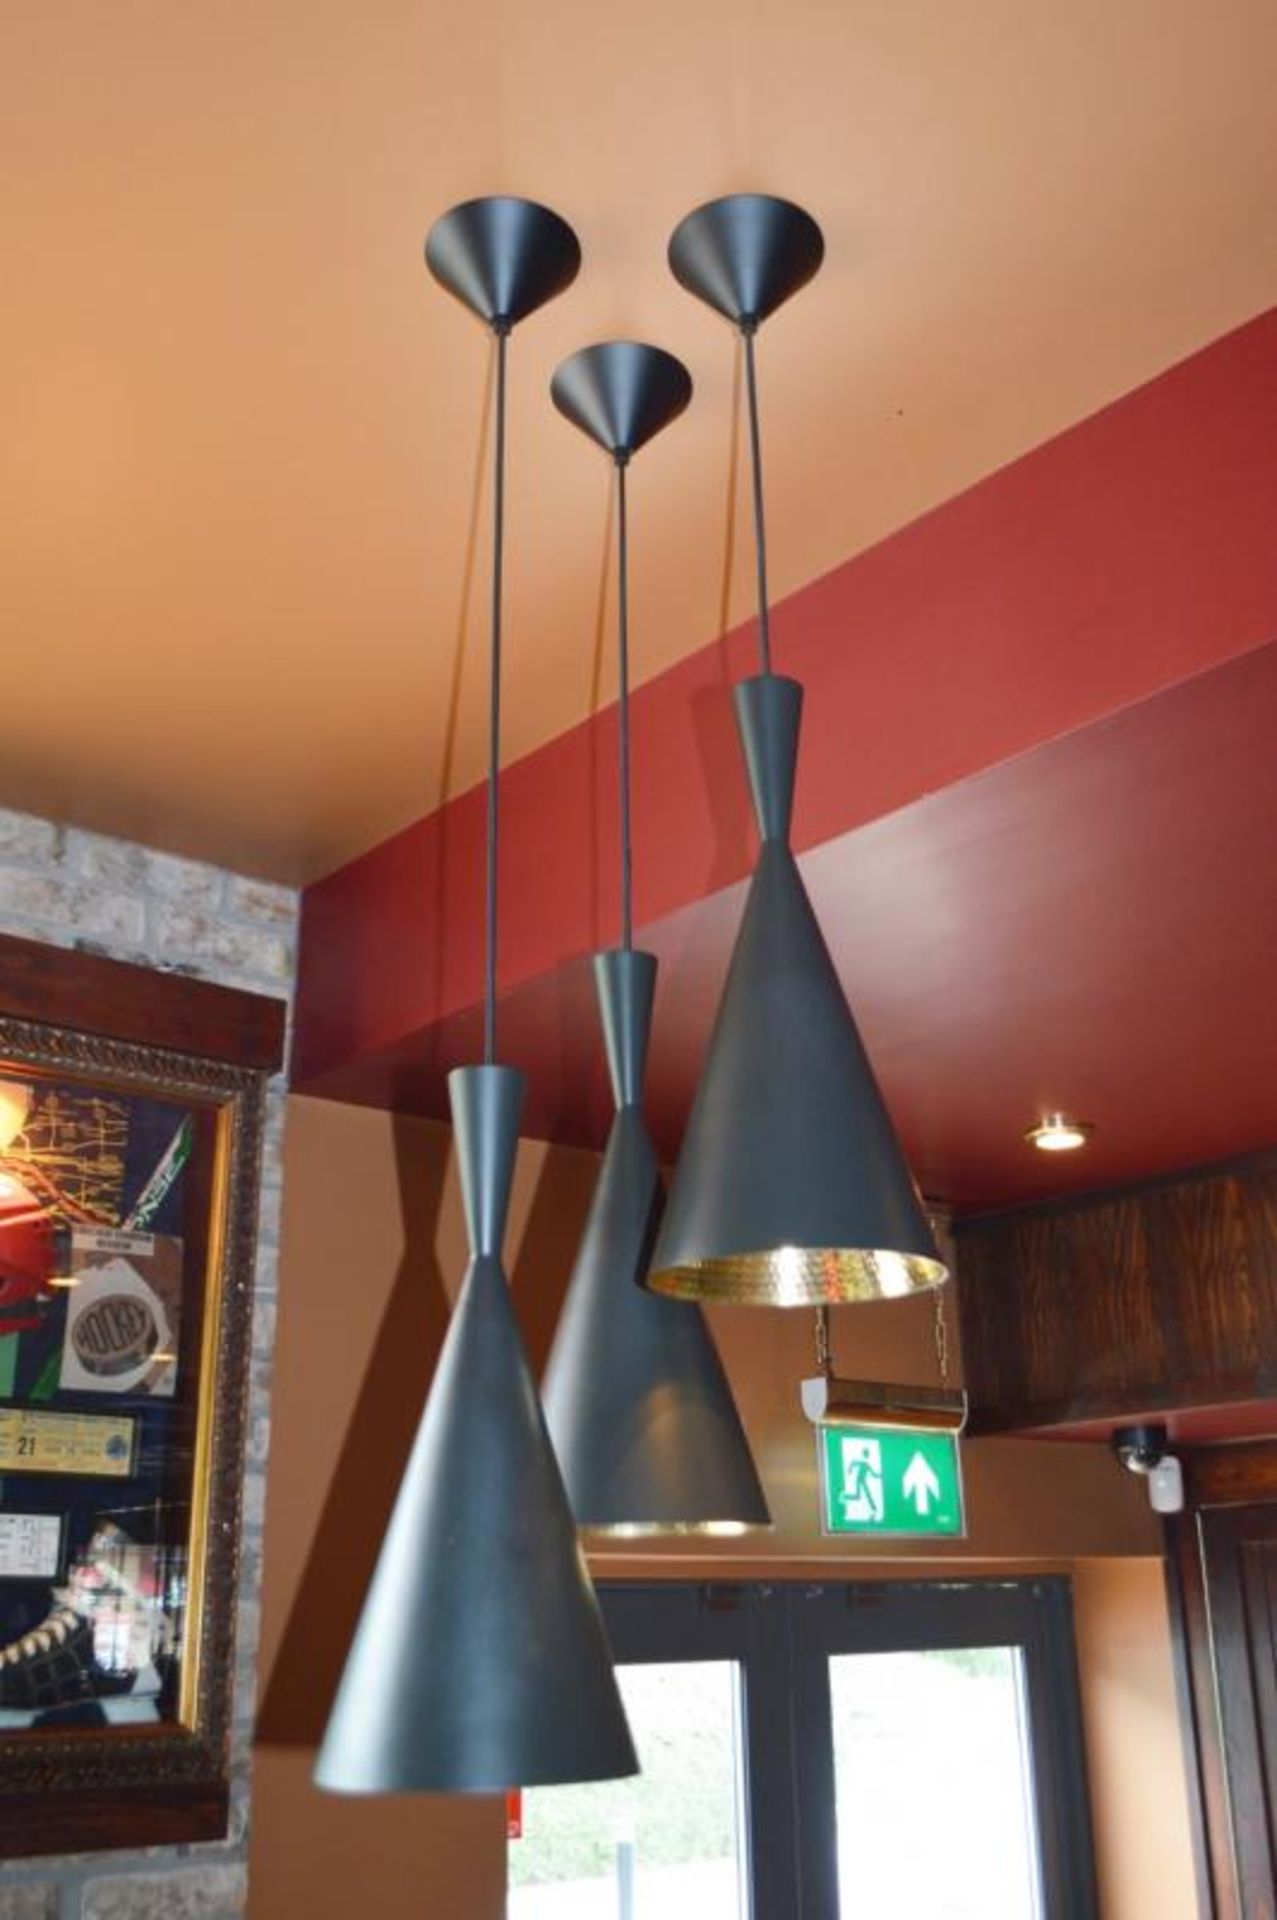 5 x Triple Pendant Light Fittings in Black With Pitted Brass Interior - Max Drop Appox 110 cms x - Image 2 of 4